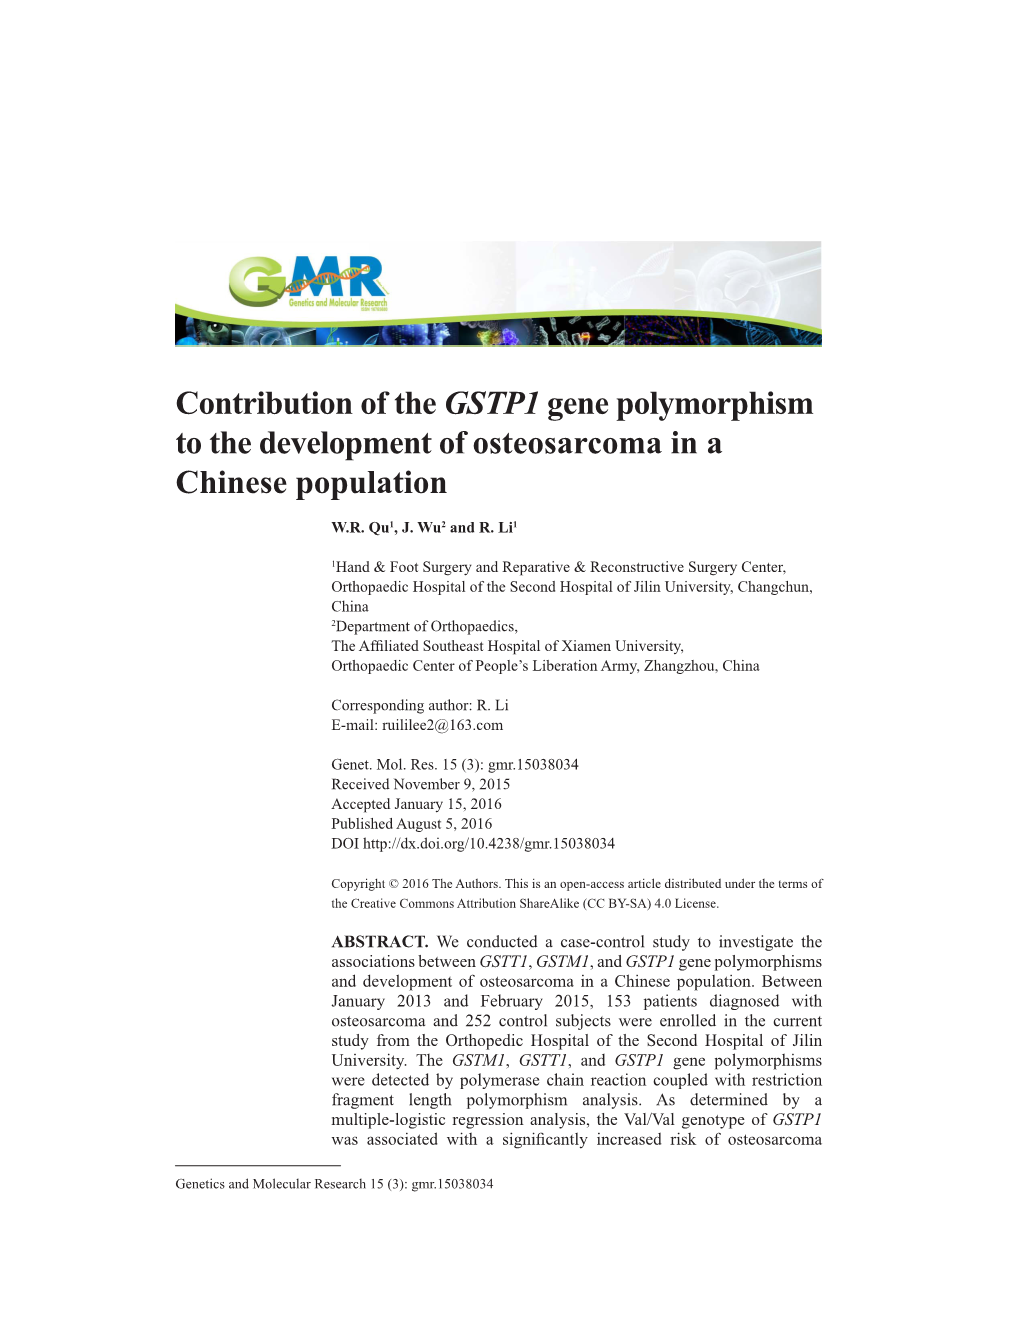 Contribution of the GSTP1 Gene Polymorphism to the Development of Osteosarcoma in a Chinese Population